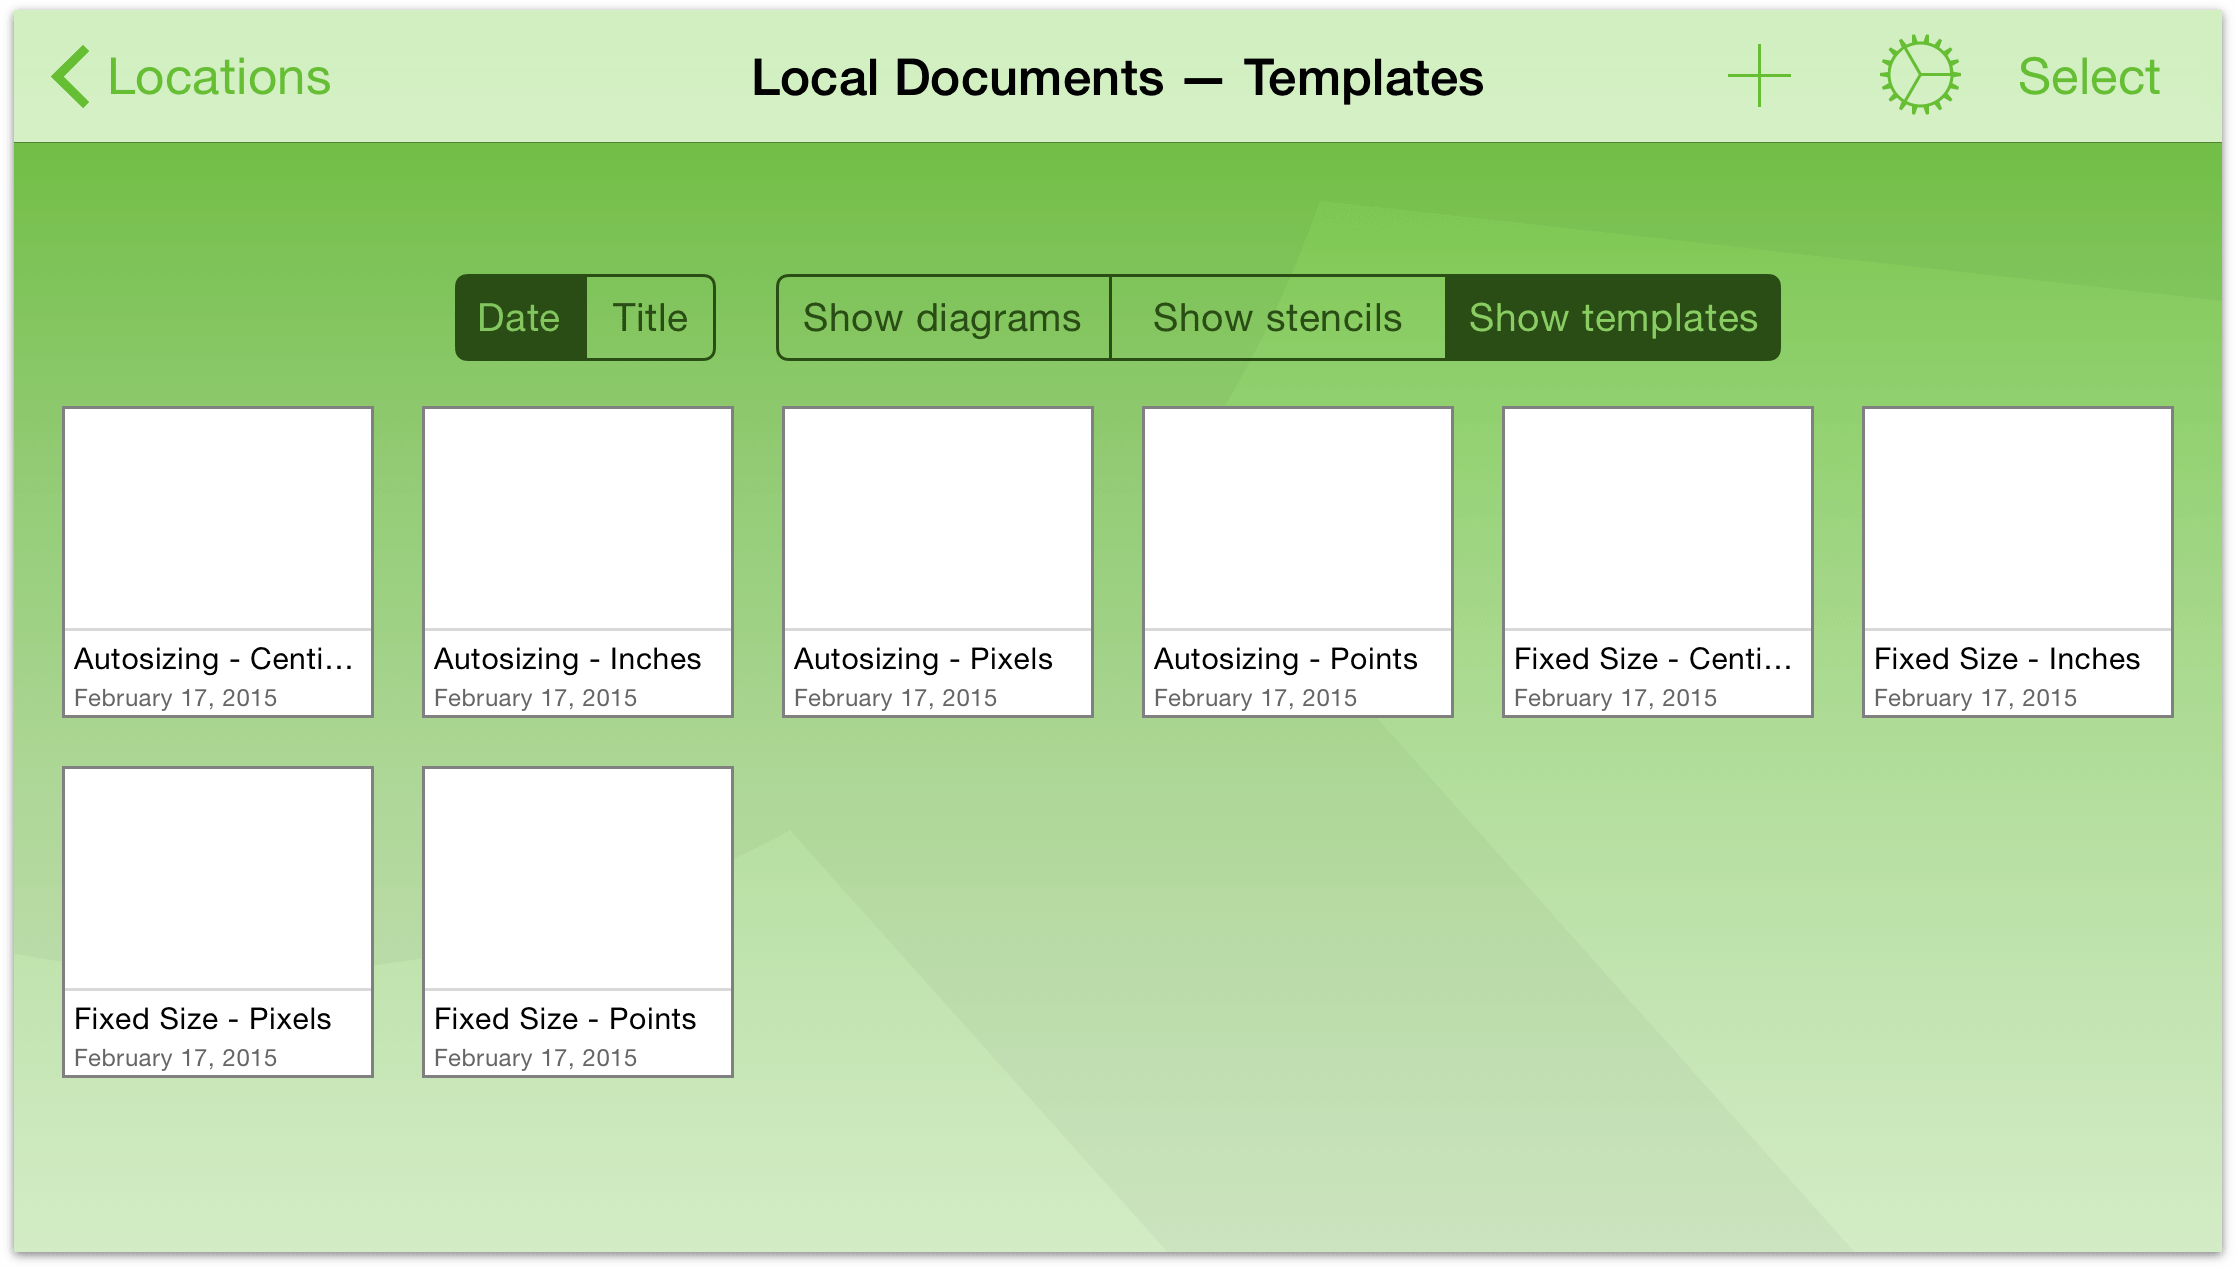 Tap Show templates to see the available templates